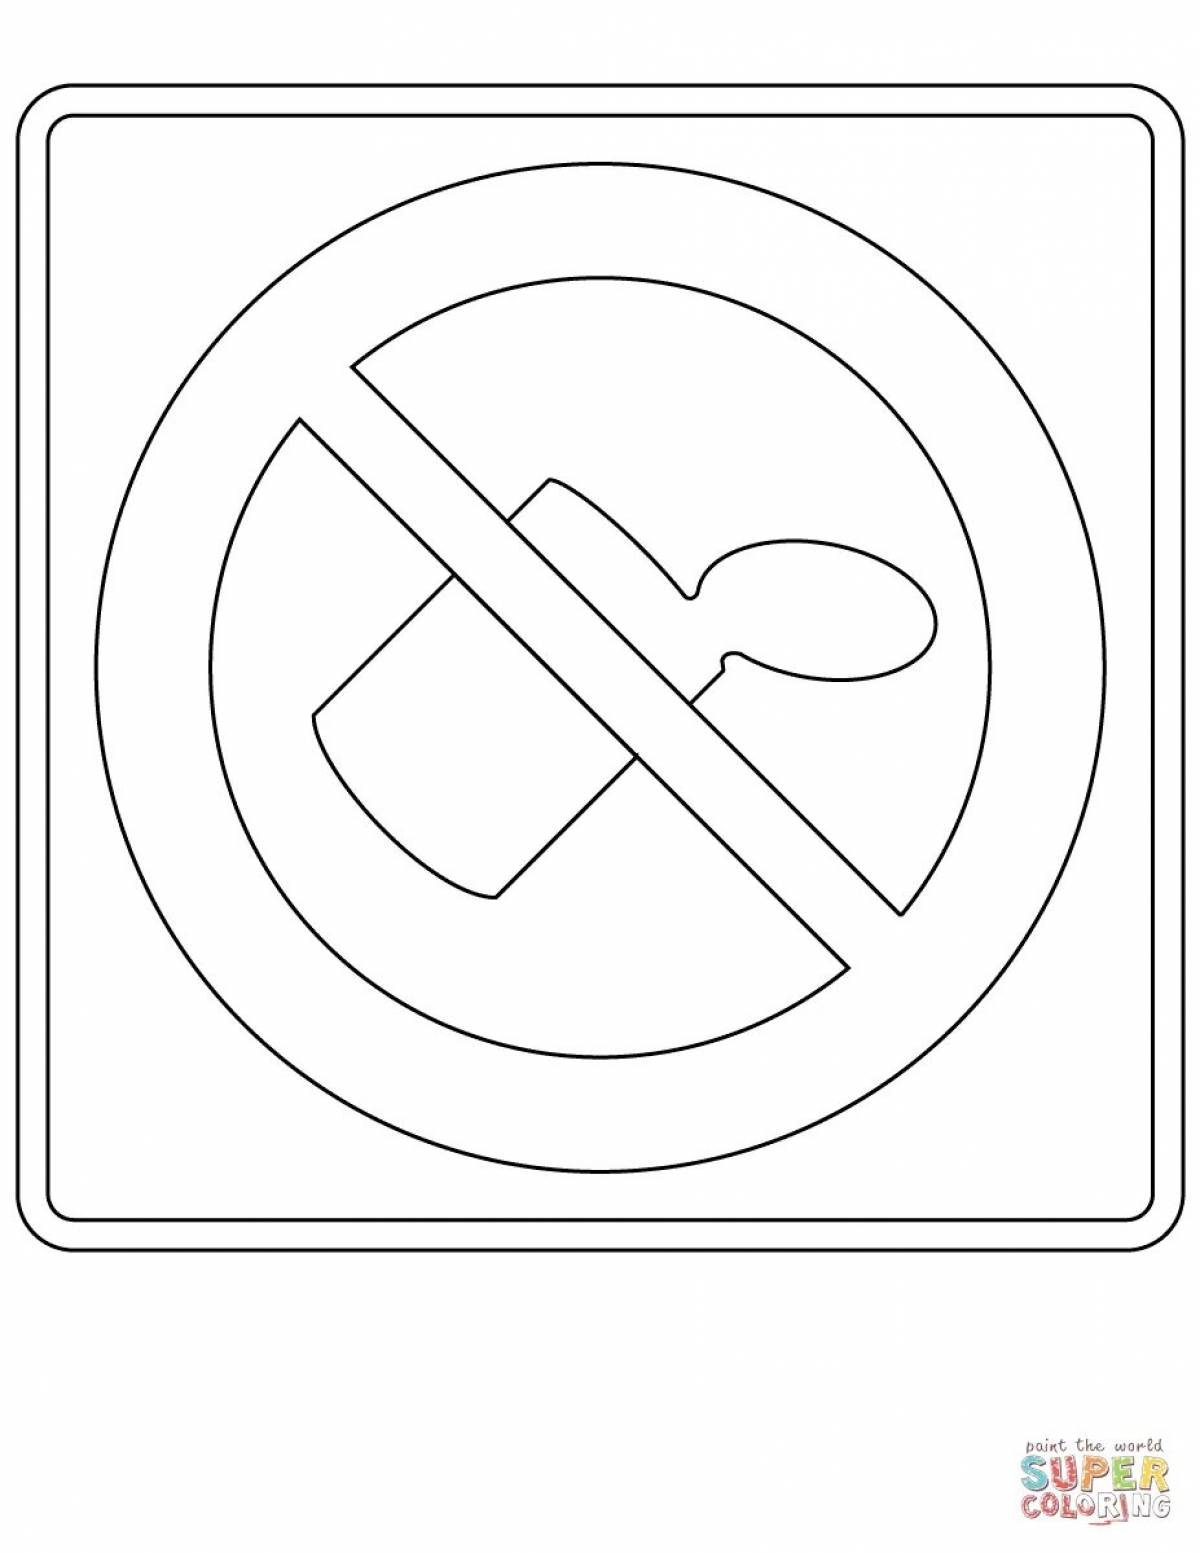 Coloring page nice safety sign